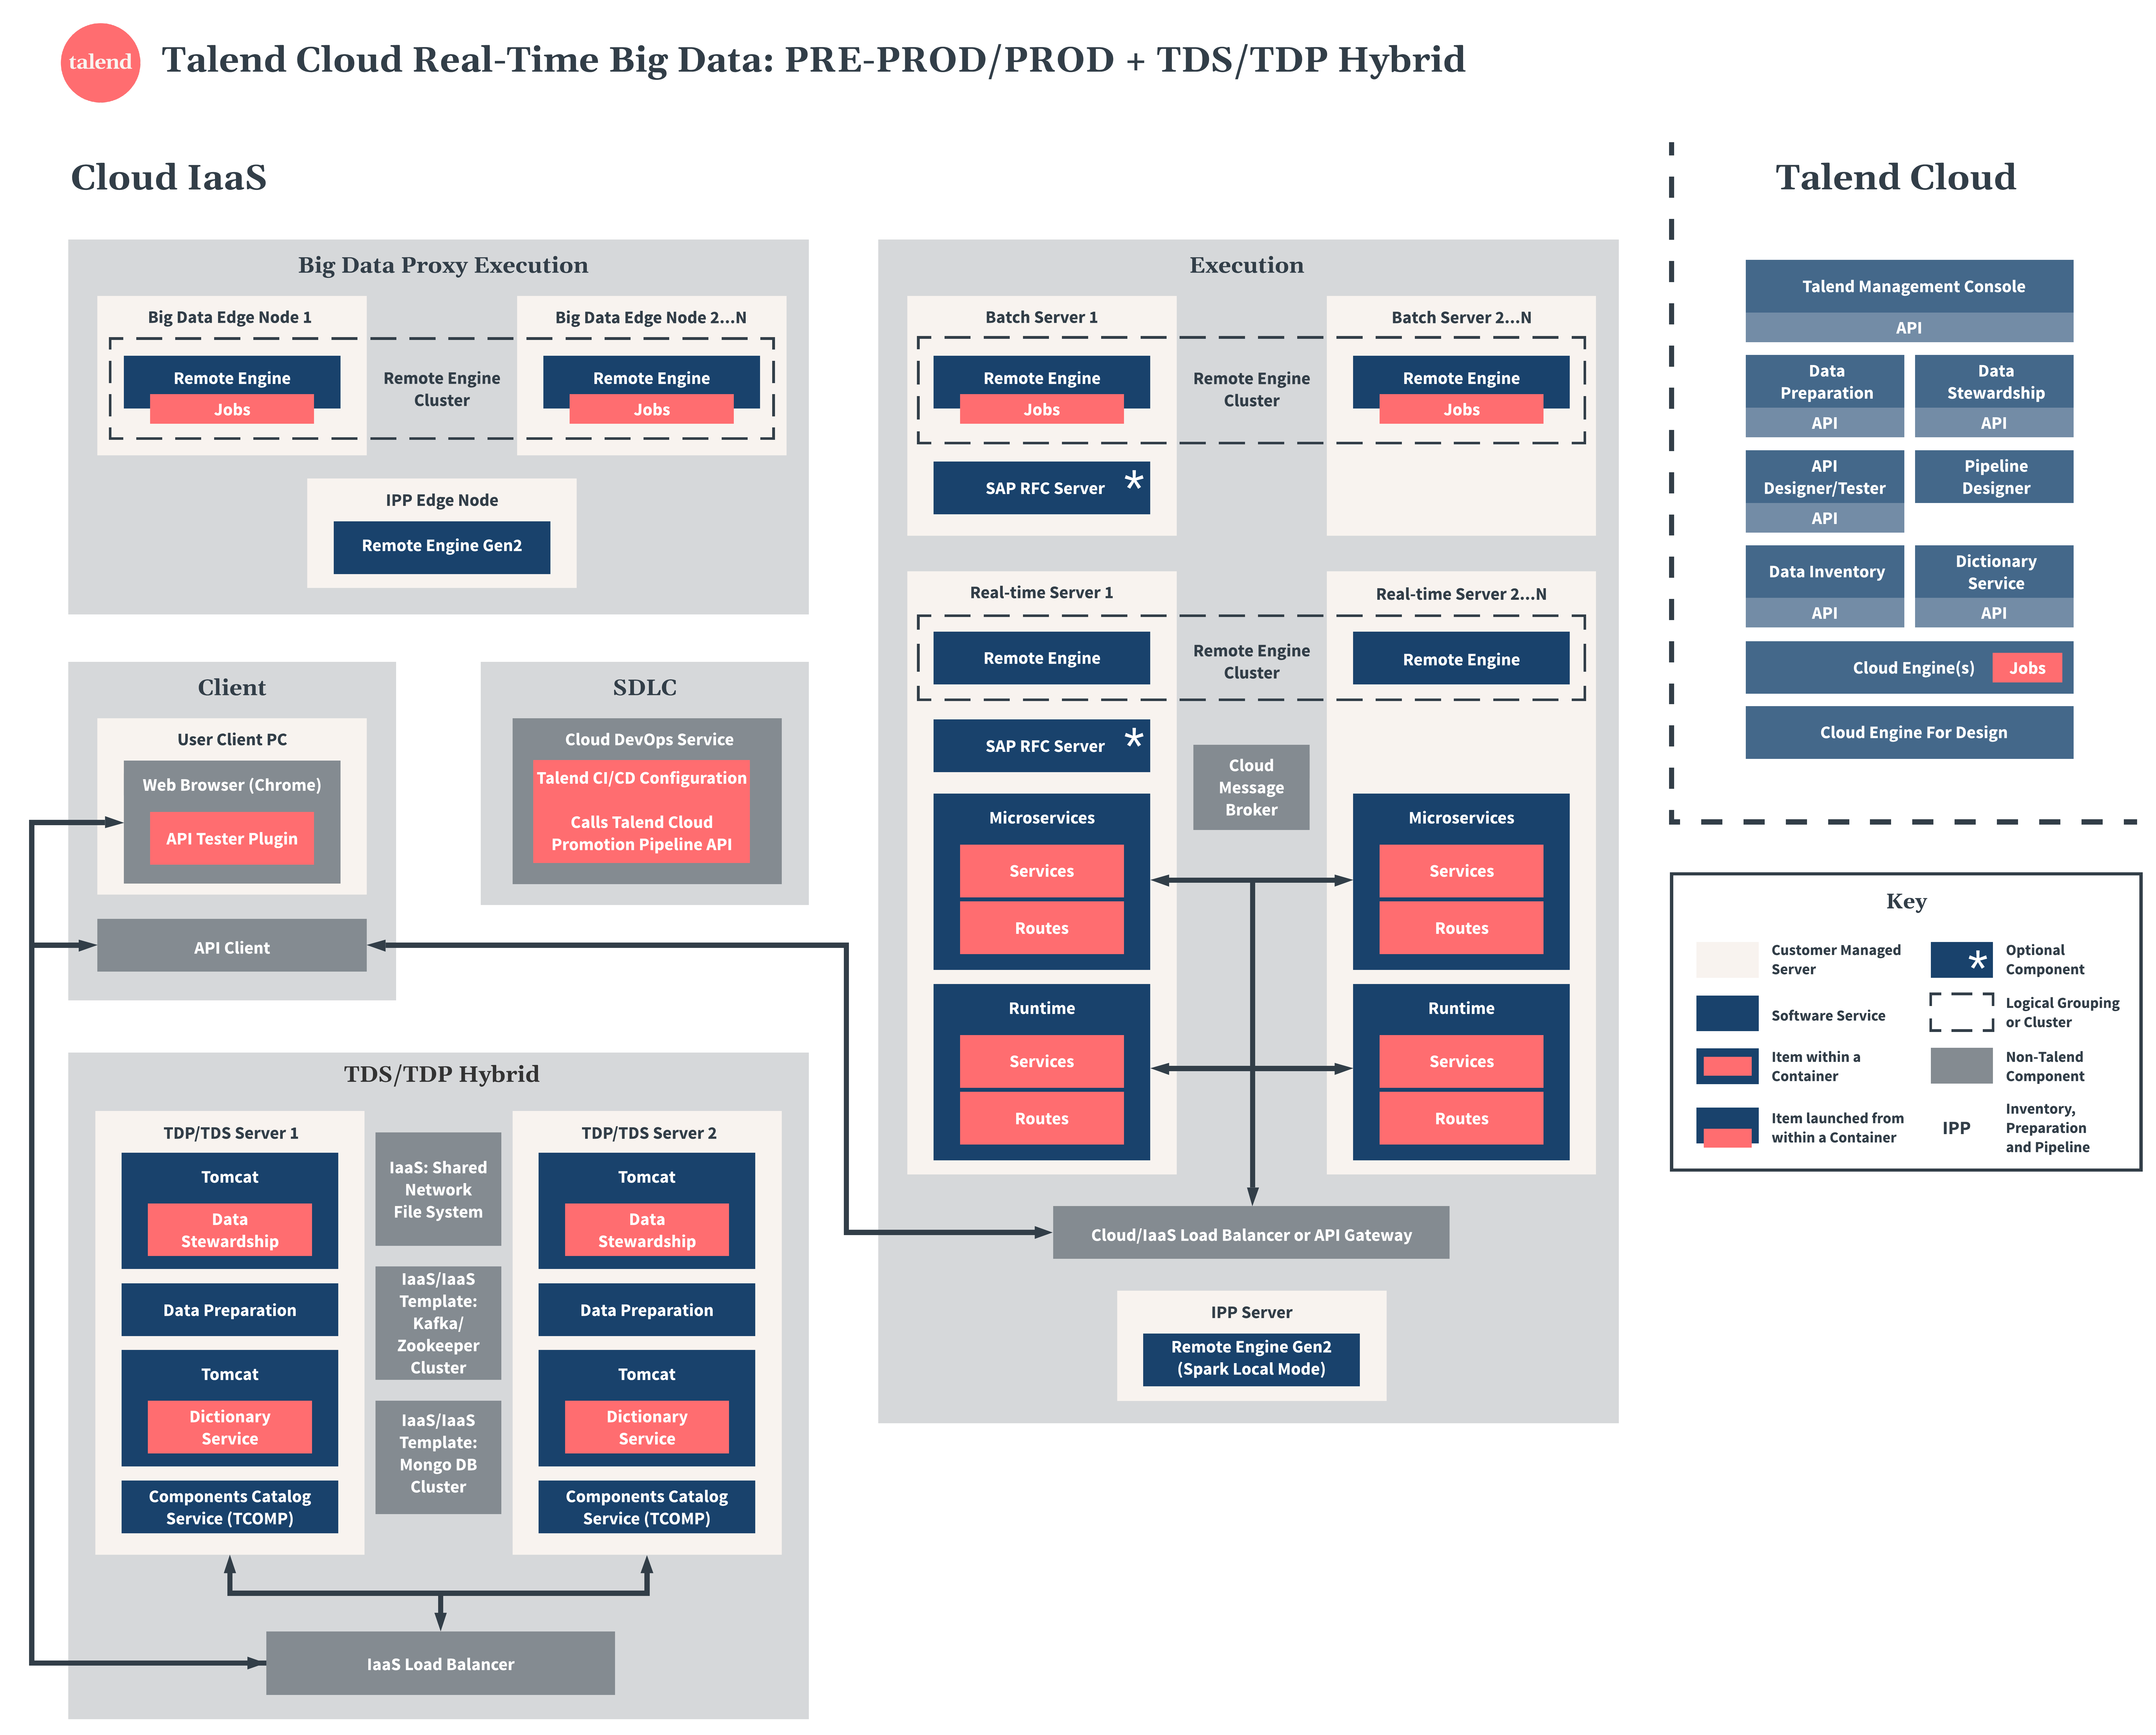 Talend Cloud Real-Time Big Data pre-production and production with TDS and TDP hybrid diagram.